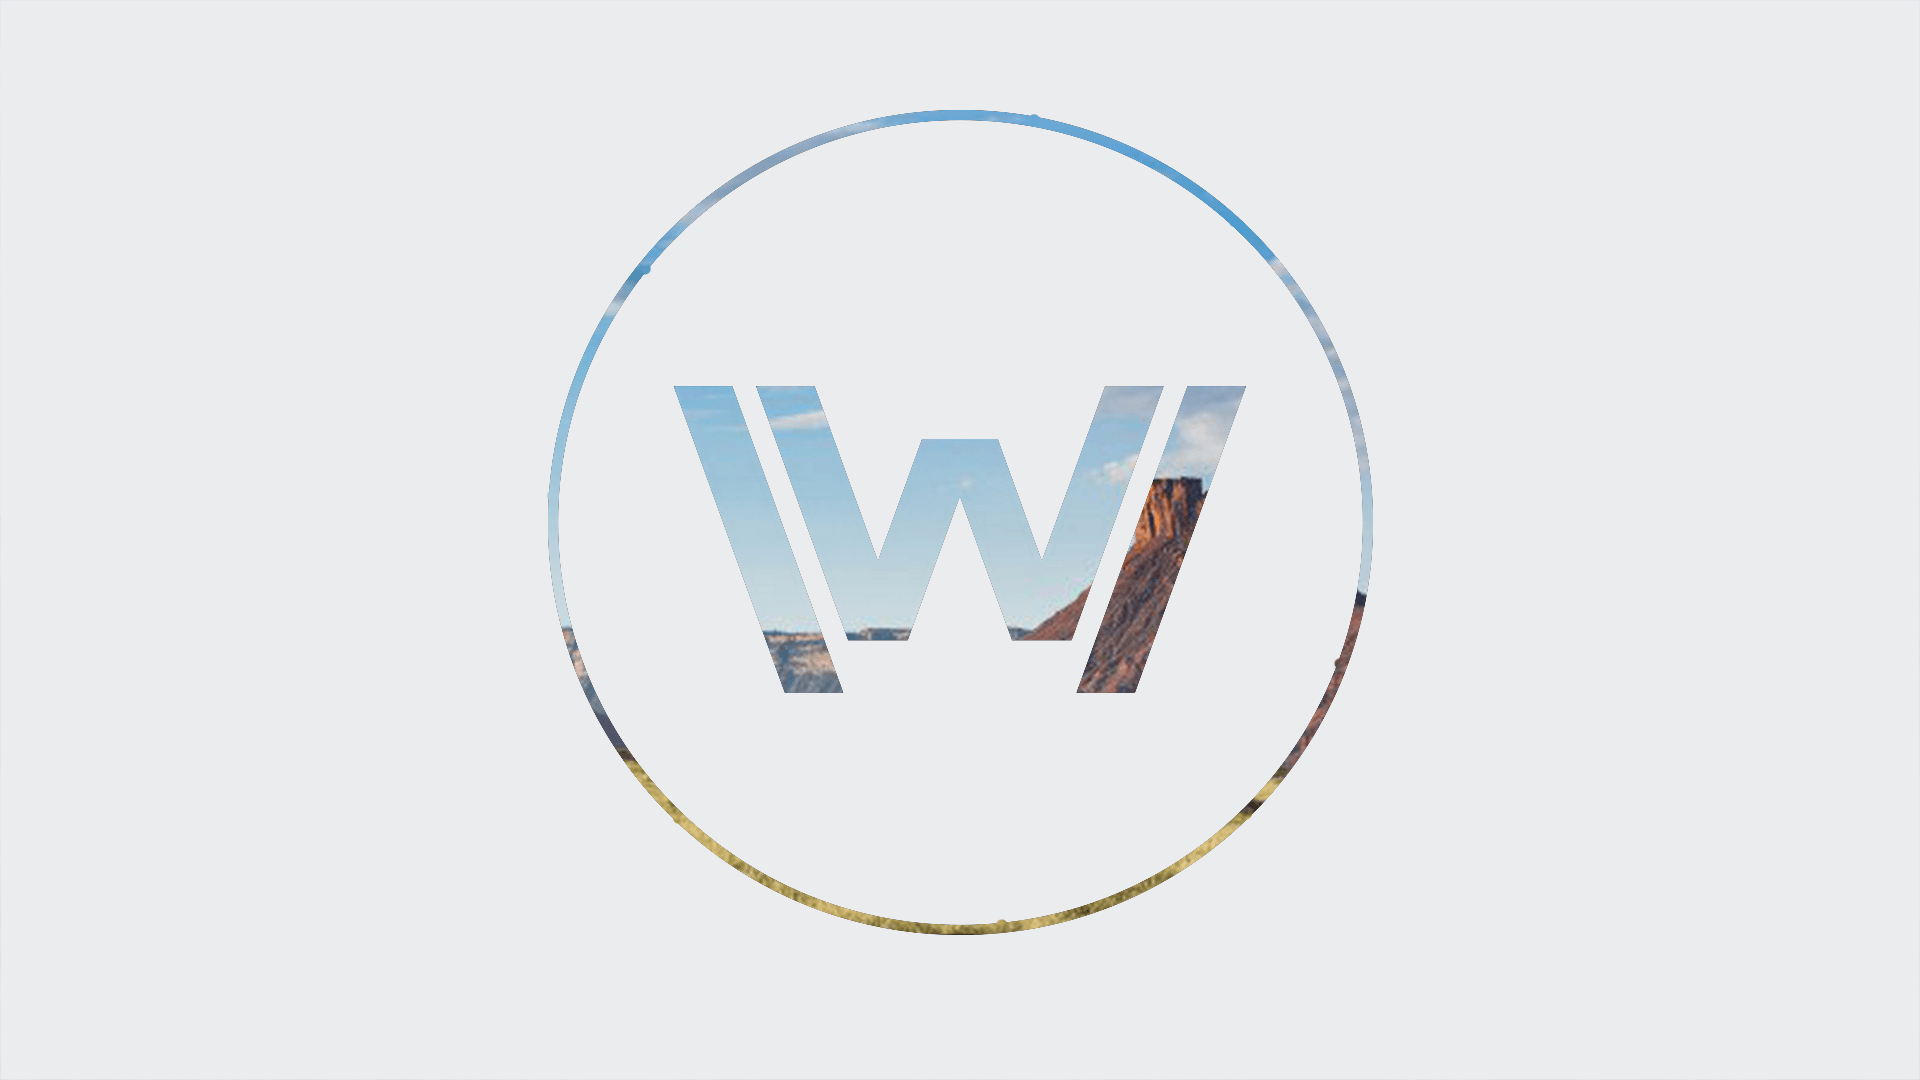 I thought I would share some Westworld wallpaper I made!